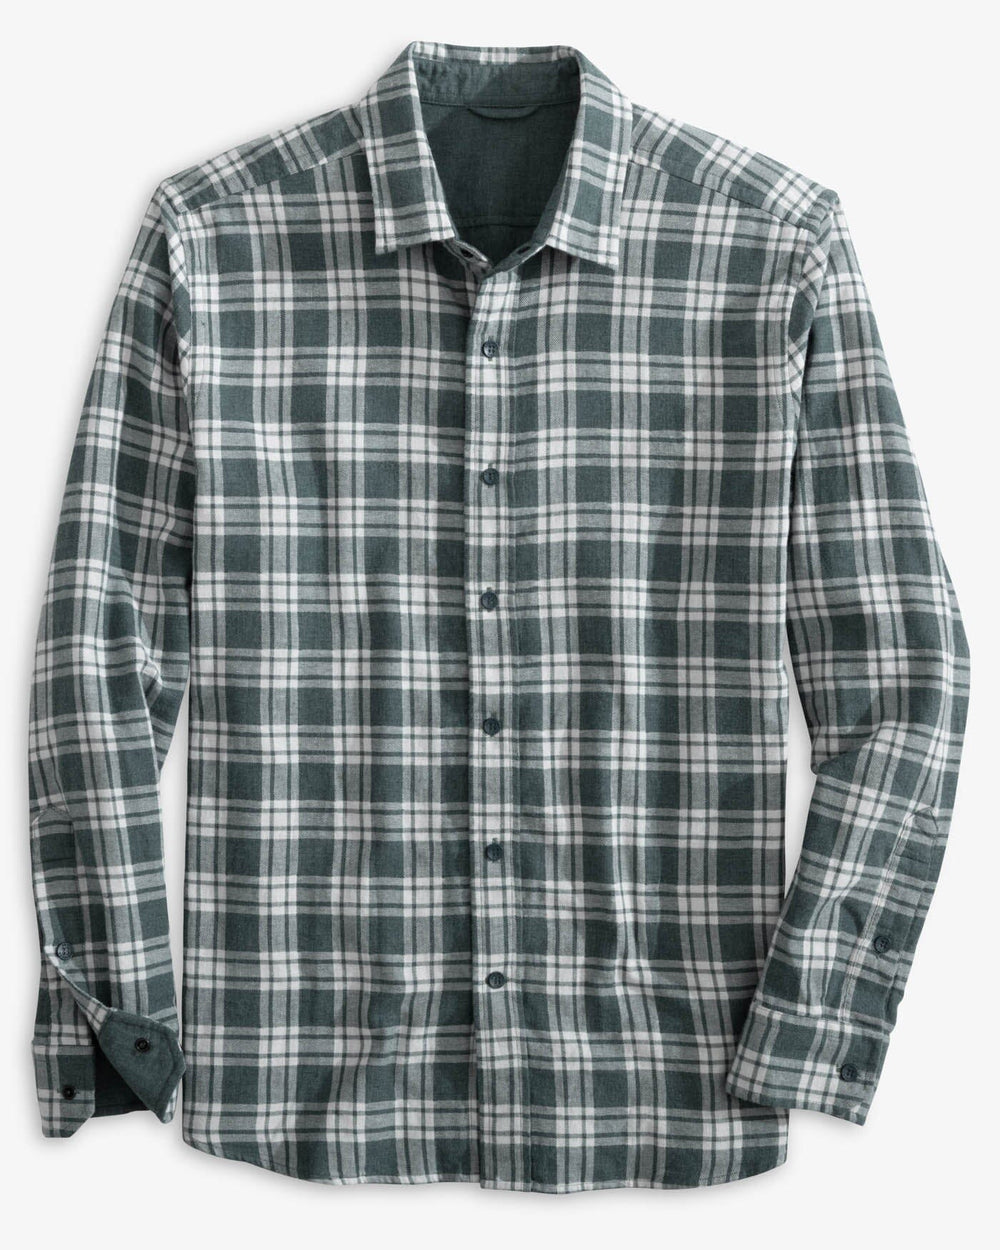 The front view of the Southern Tide Heather Melbourne Reversible Plaid Sport Shirt by Southern Tide - Heather Dark Slate